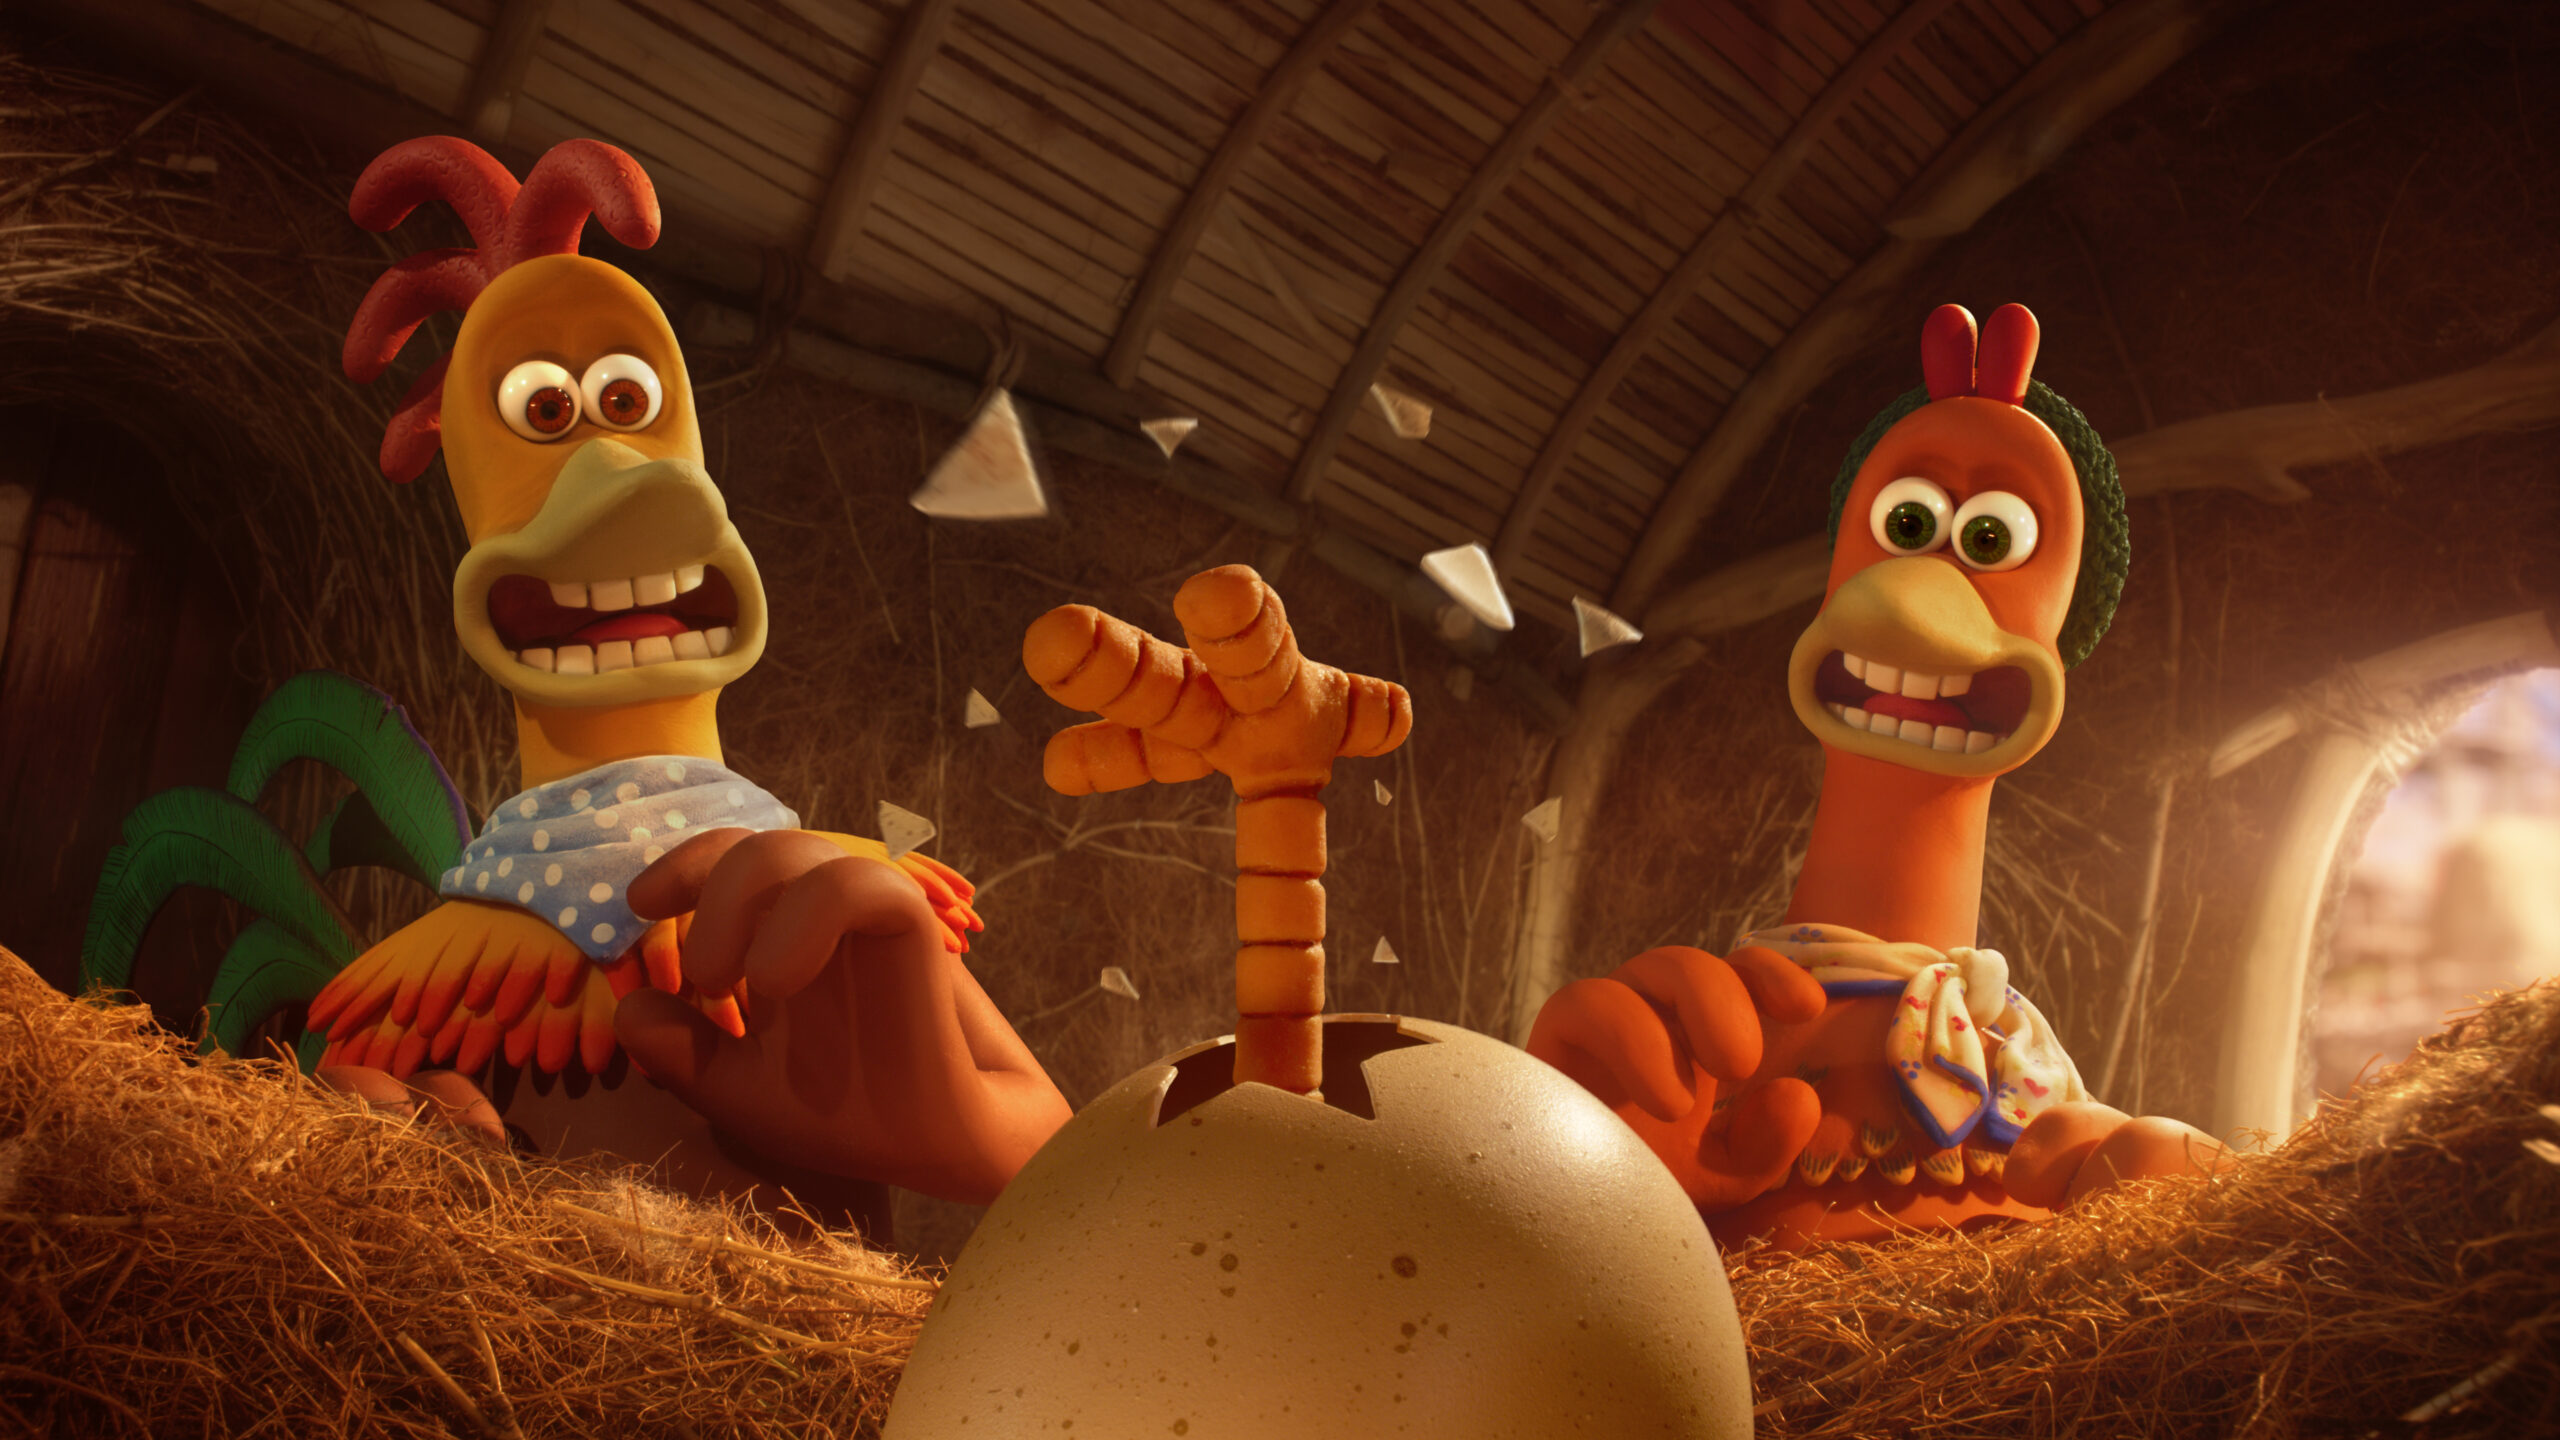 CHICKEN RUN: DAWN OF THE NUGGET - (L to R): Rocky (Zachary Levi) and Ginger (Thandiwe Newton) are back, in CHICKEN RUN: DAWN OF THE NUGGET - the eagerly anticipated sequel to Aardman’s hit film, CHICKEN RUN. CHICKEN RUN: DAWN OF THE NUGGET will make its debut only on Netflix in 2023.CHICKEN RUN: DAWN OF THE NUGGET will make its debut only on Netflix in 2023. Cr: Aardman/NETFLIX © 2022